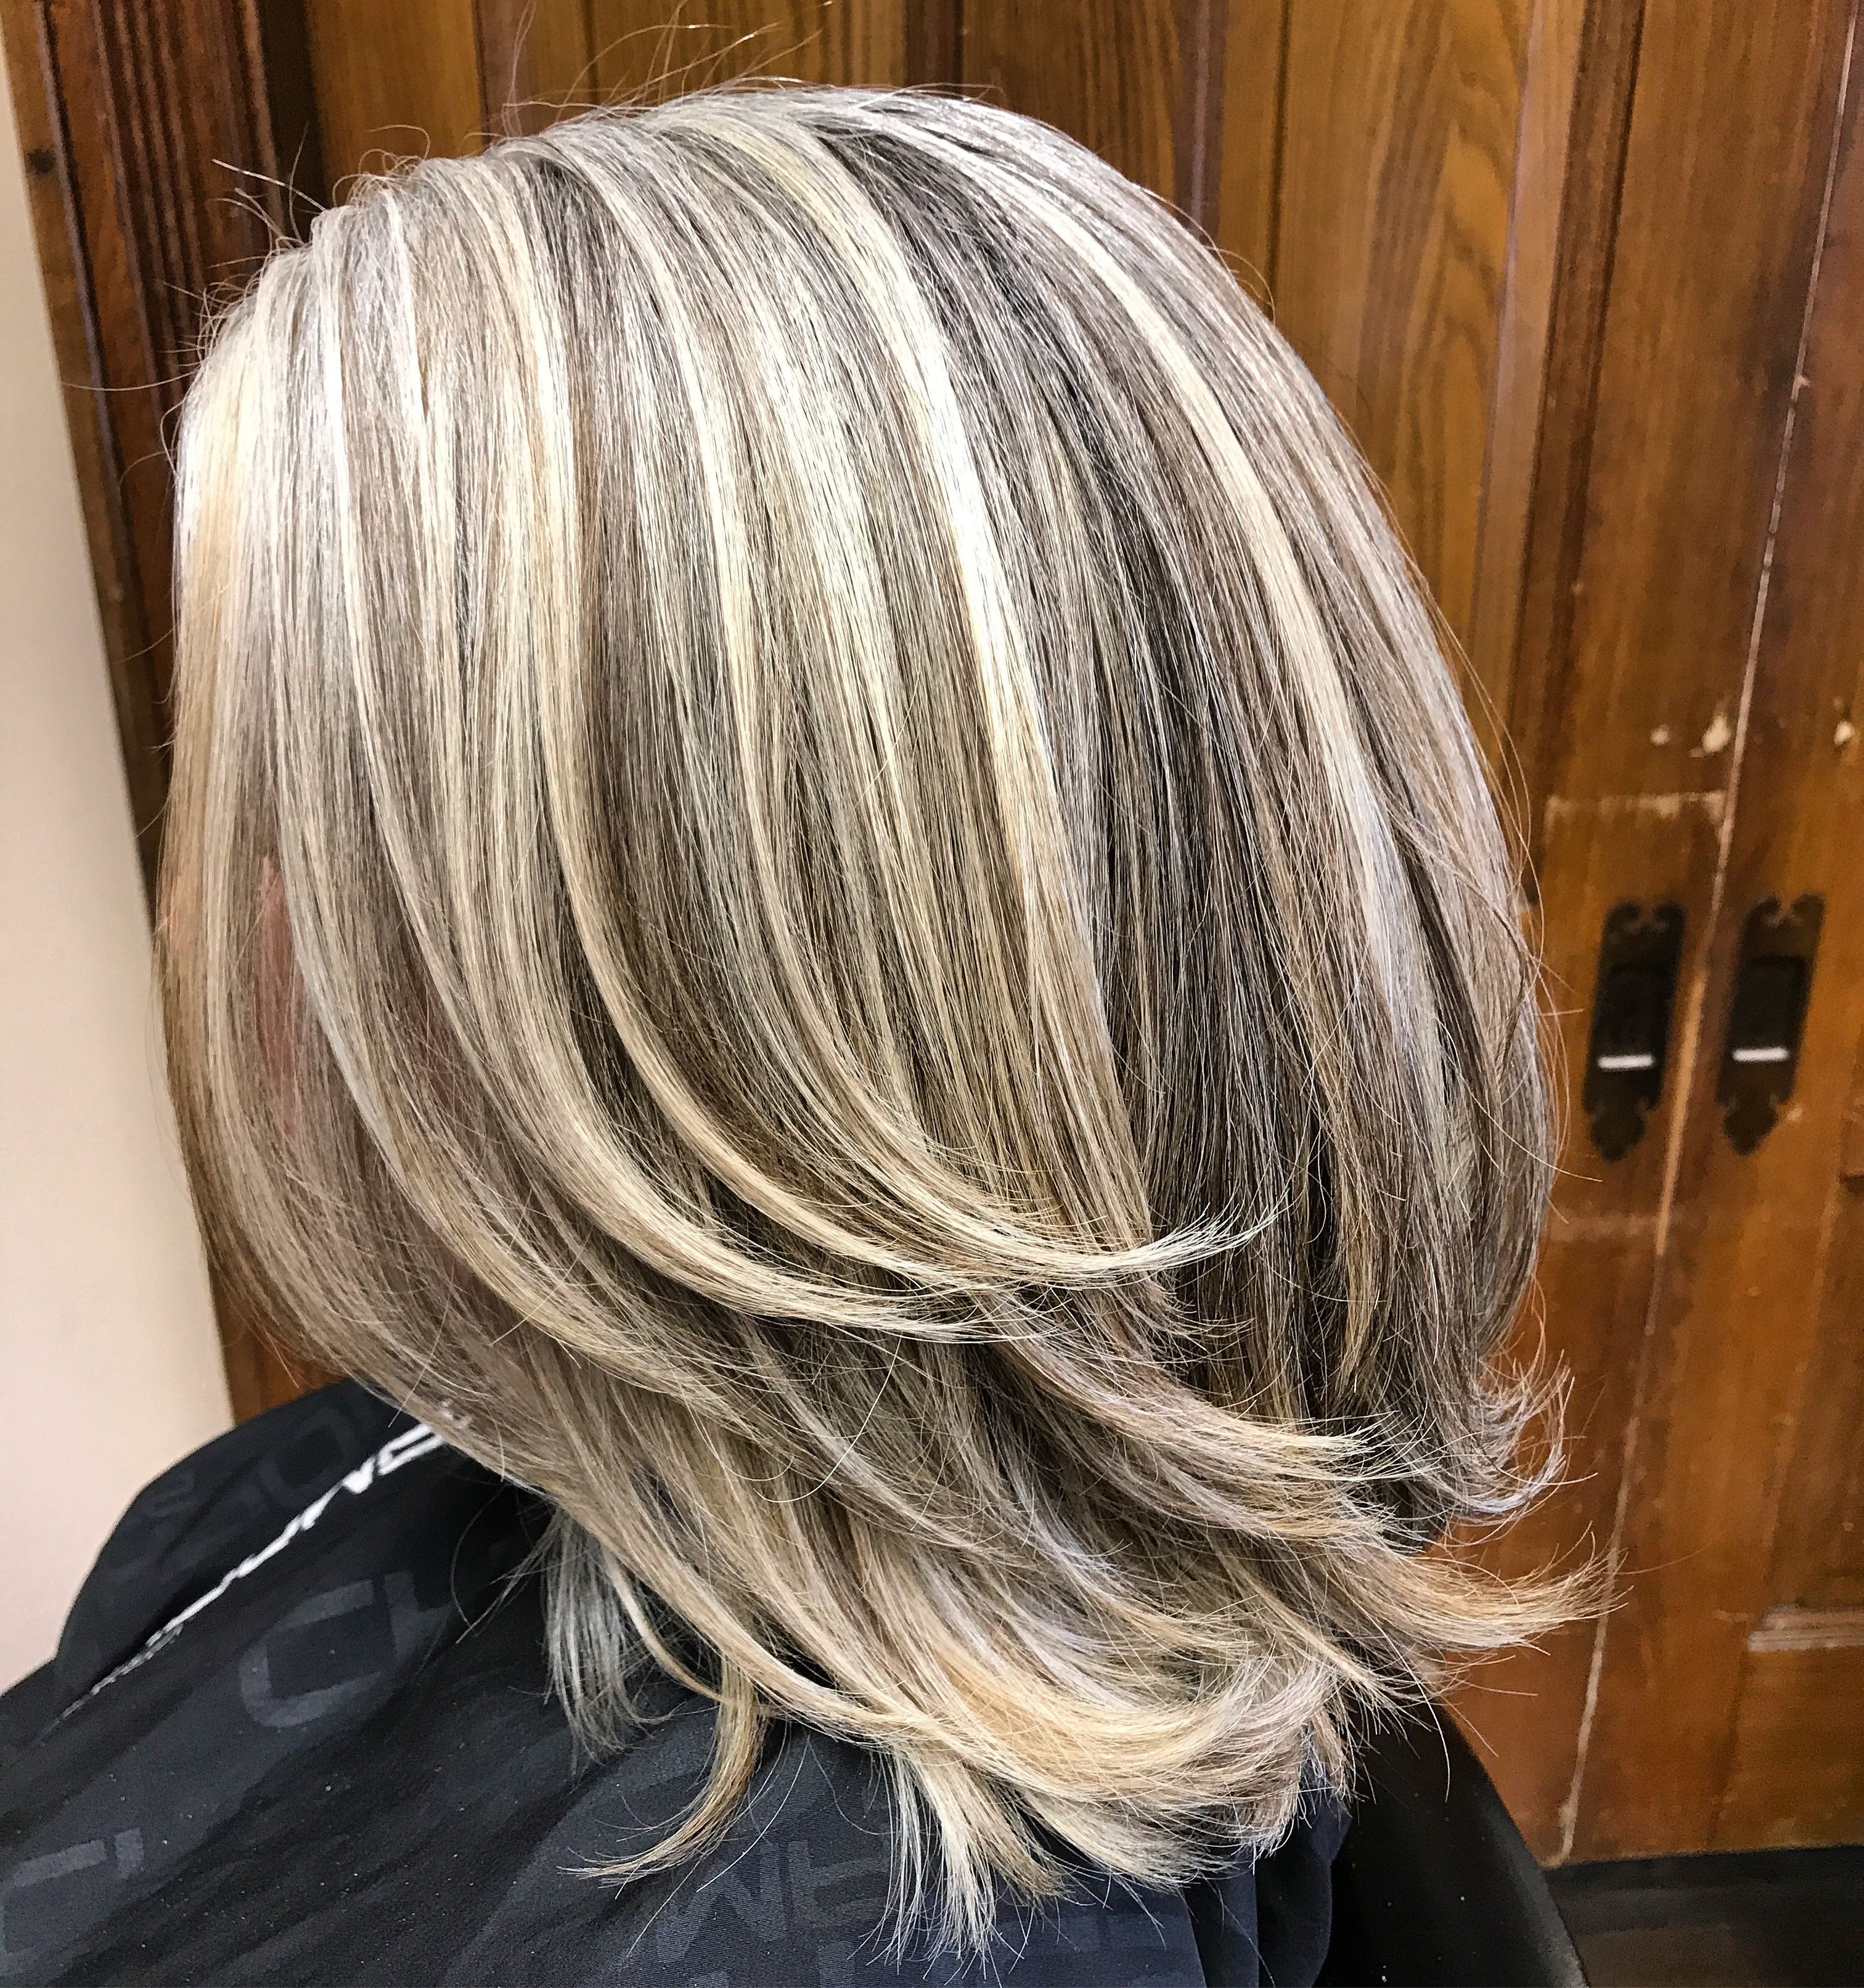 Enhanced Natural Gray Hairmoi | Beautiful Hair In 2018 Intended For Dynamic Tousled Blonde Bob Hairstyles With Dark Underlayer (View 14 of 20)